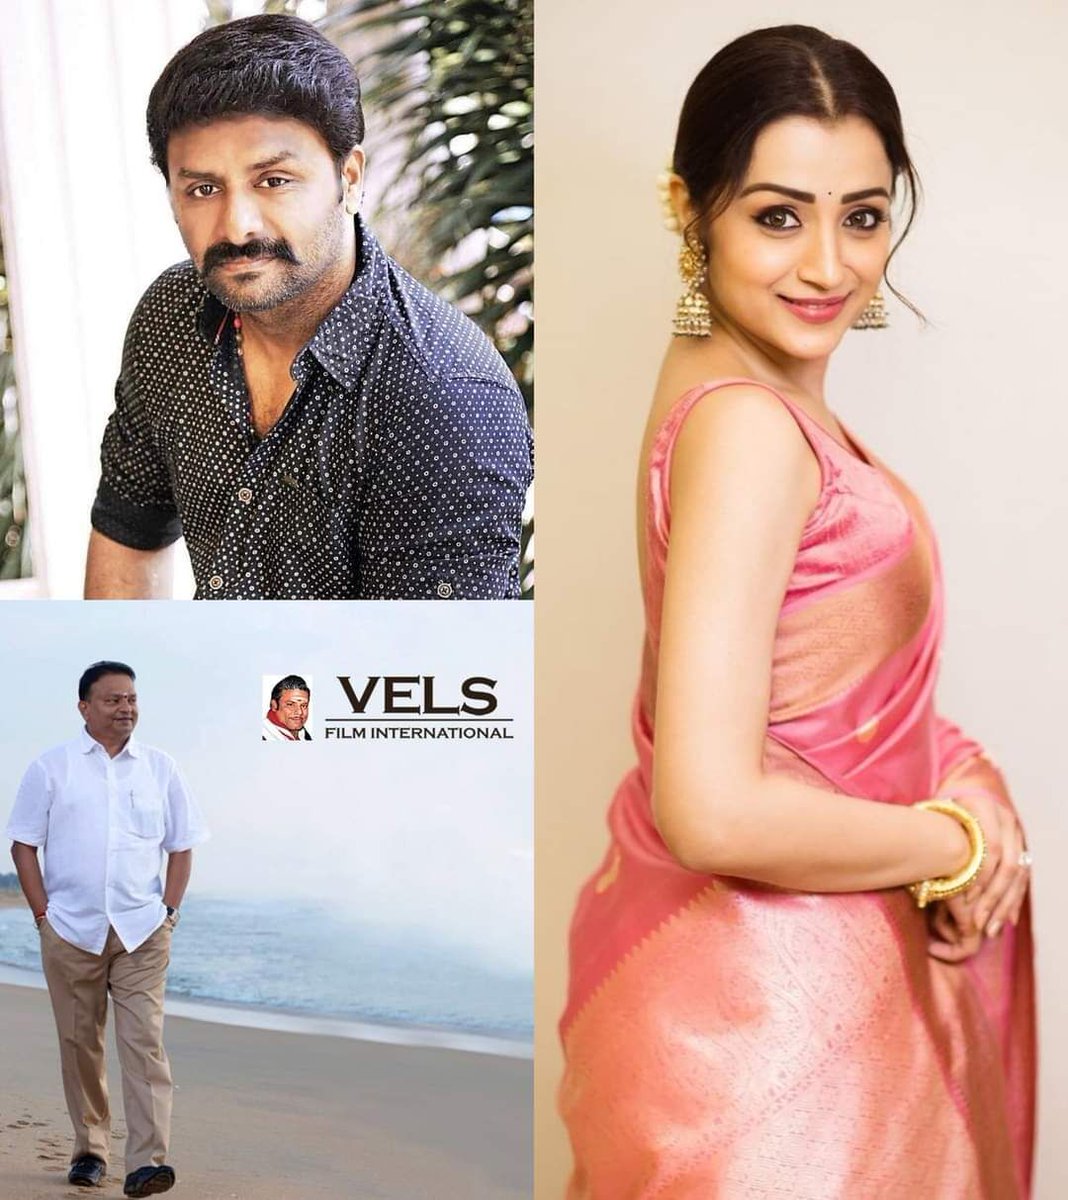 #Trisha's next after #Leo, to be directed by #GauravNarayanan (who had previously made #ThoongaNagaram, #SigaramThodu, #IppadaiVellum). 

This thriller which is tentatively titled #KolaiVazhakku is bankrolled by Vels Film International, and is expected to go on floors this July.